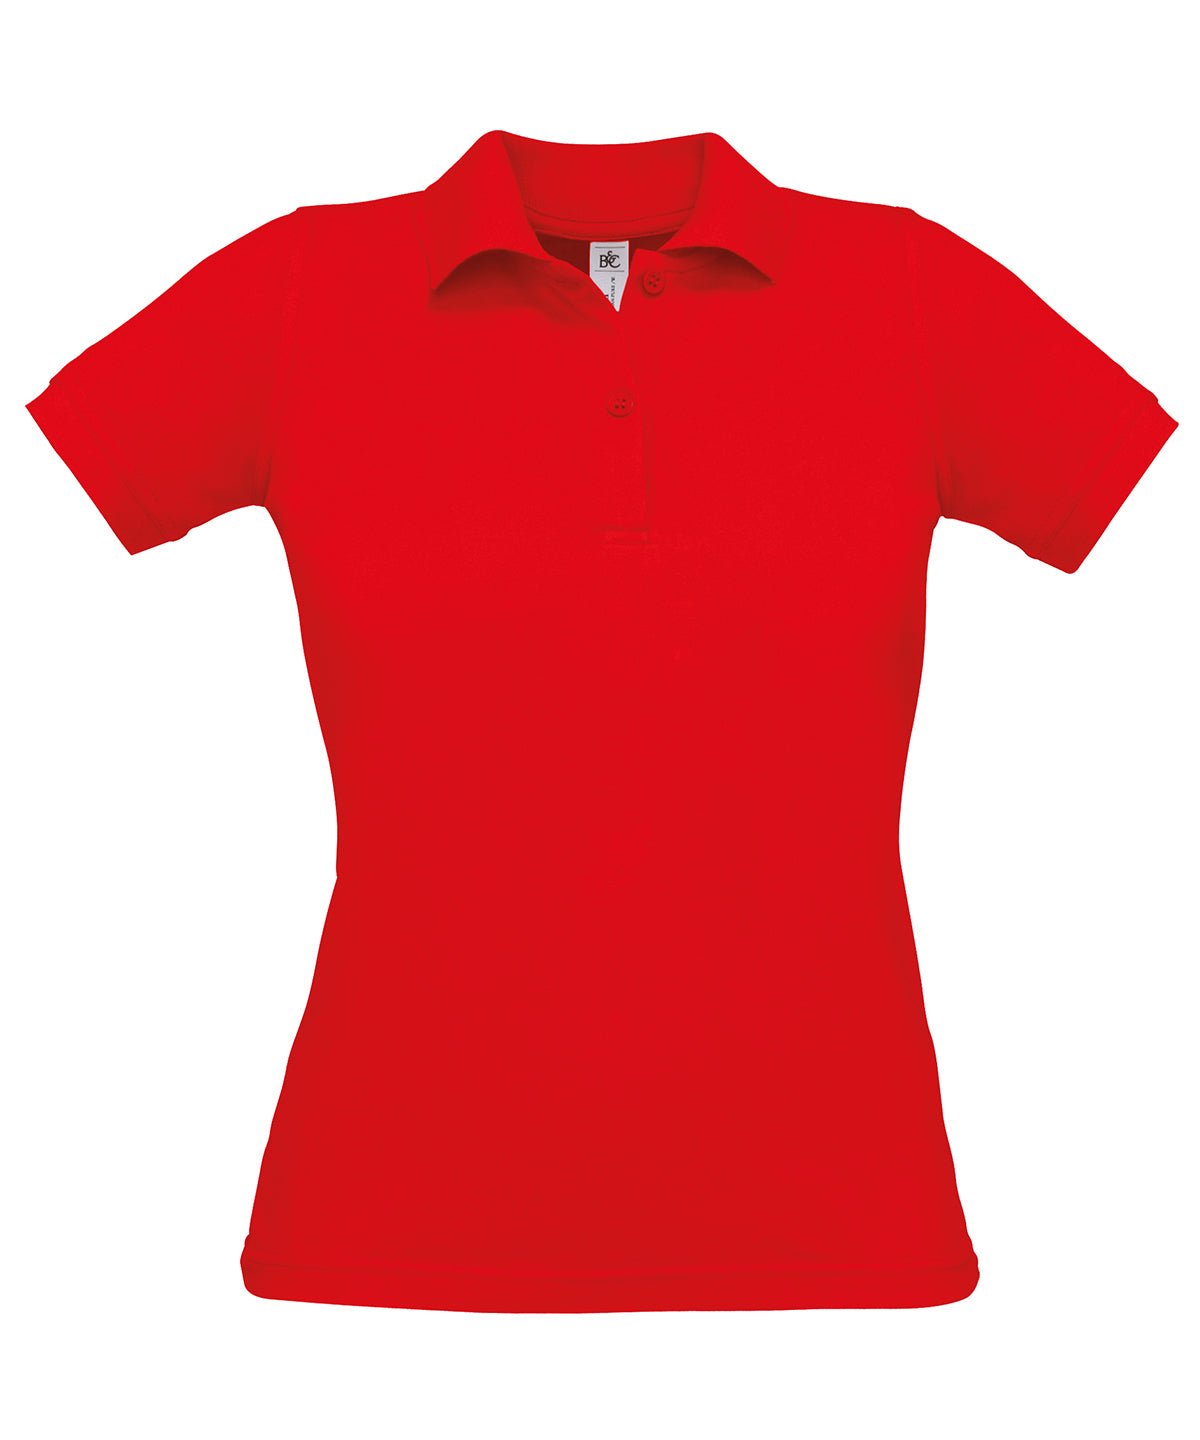 Personalised Polo Shirts - Black B&C Collection B&C Safran pure /women